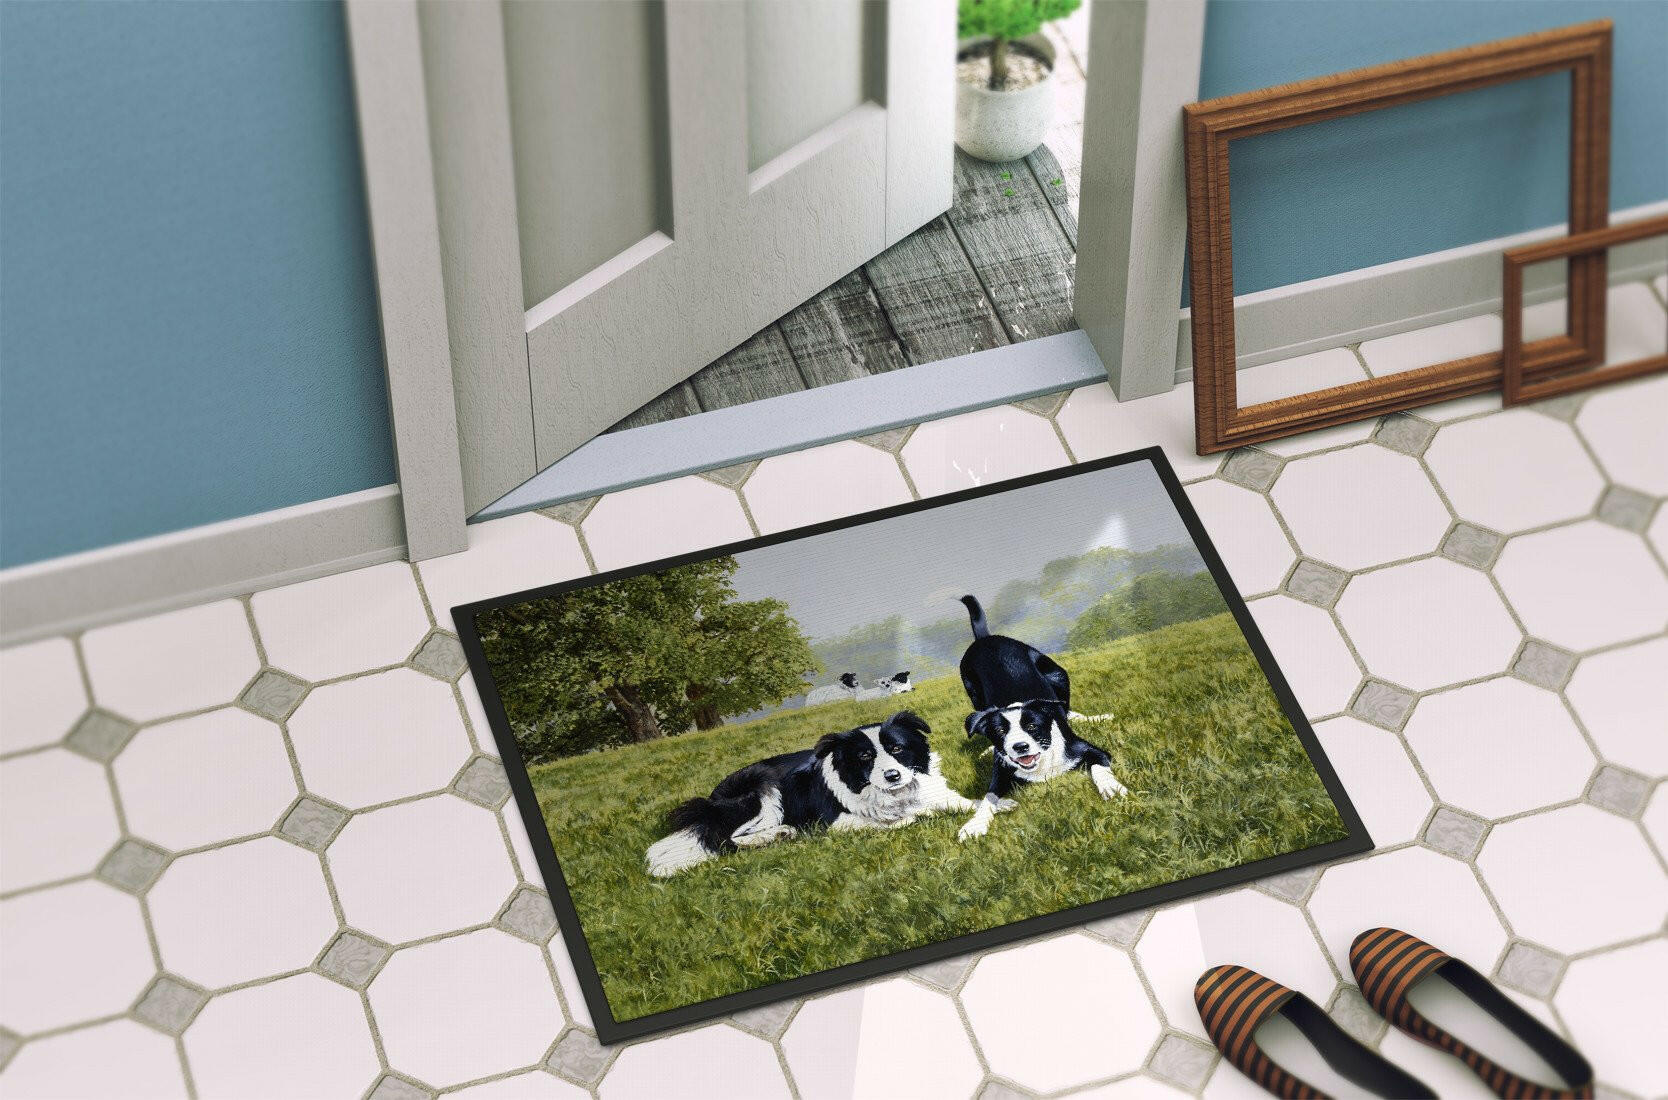 Let's Play Border Collie Indoor or Outdoor Mat 24x36 FRF0014JMAT - the-store.com